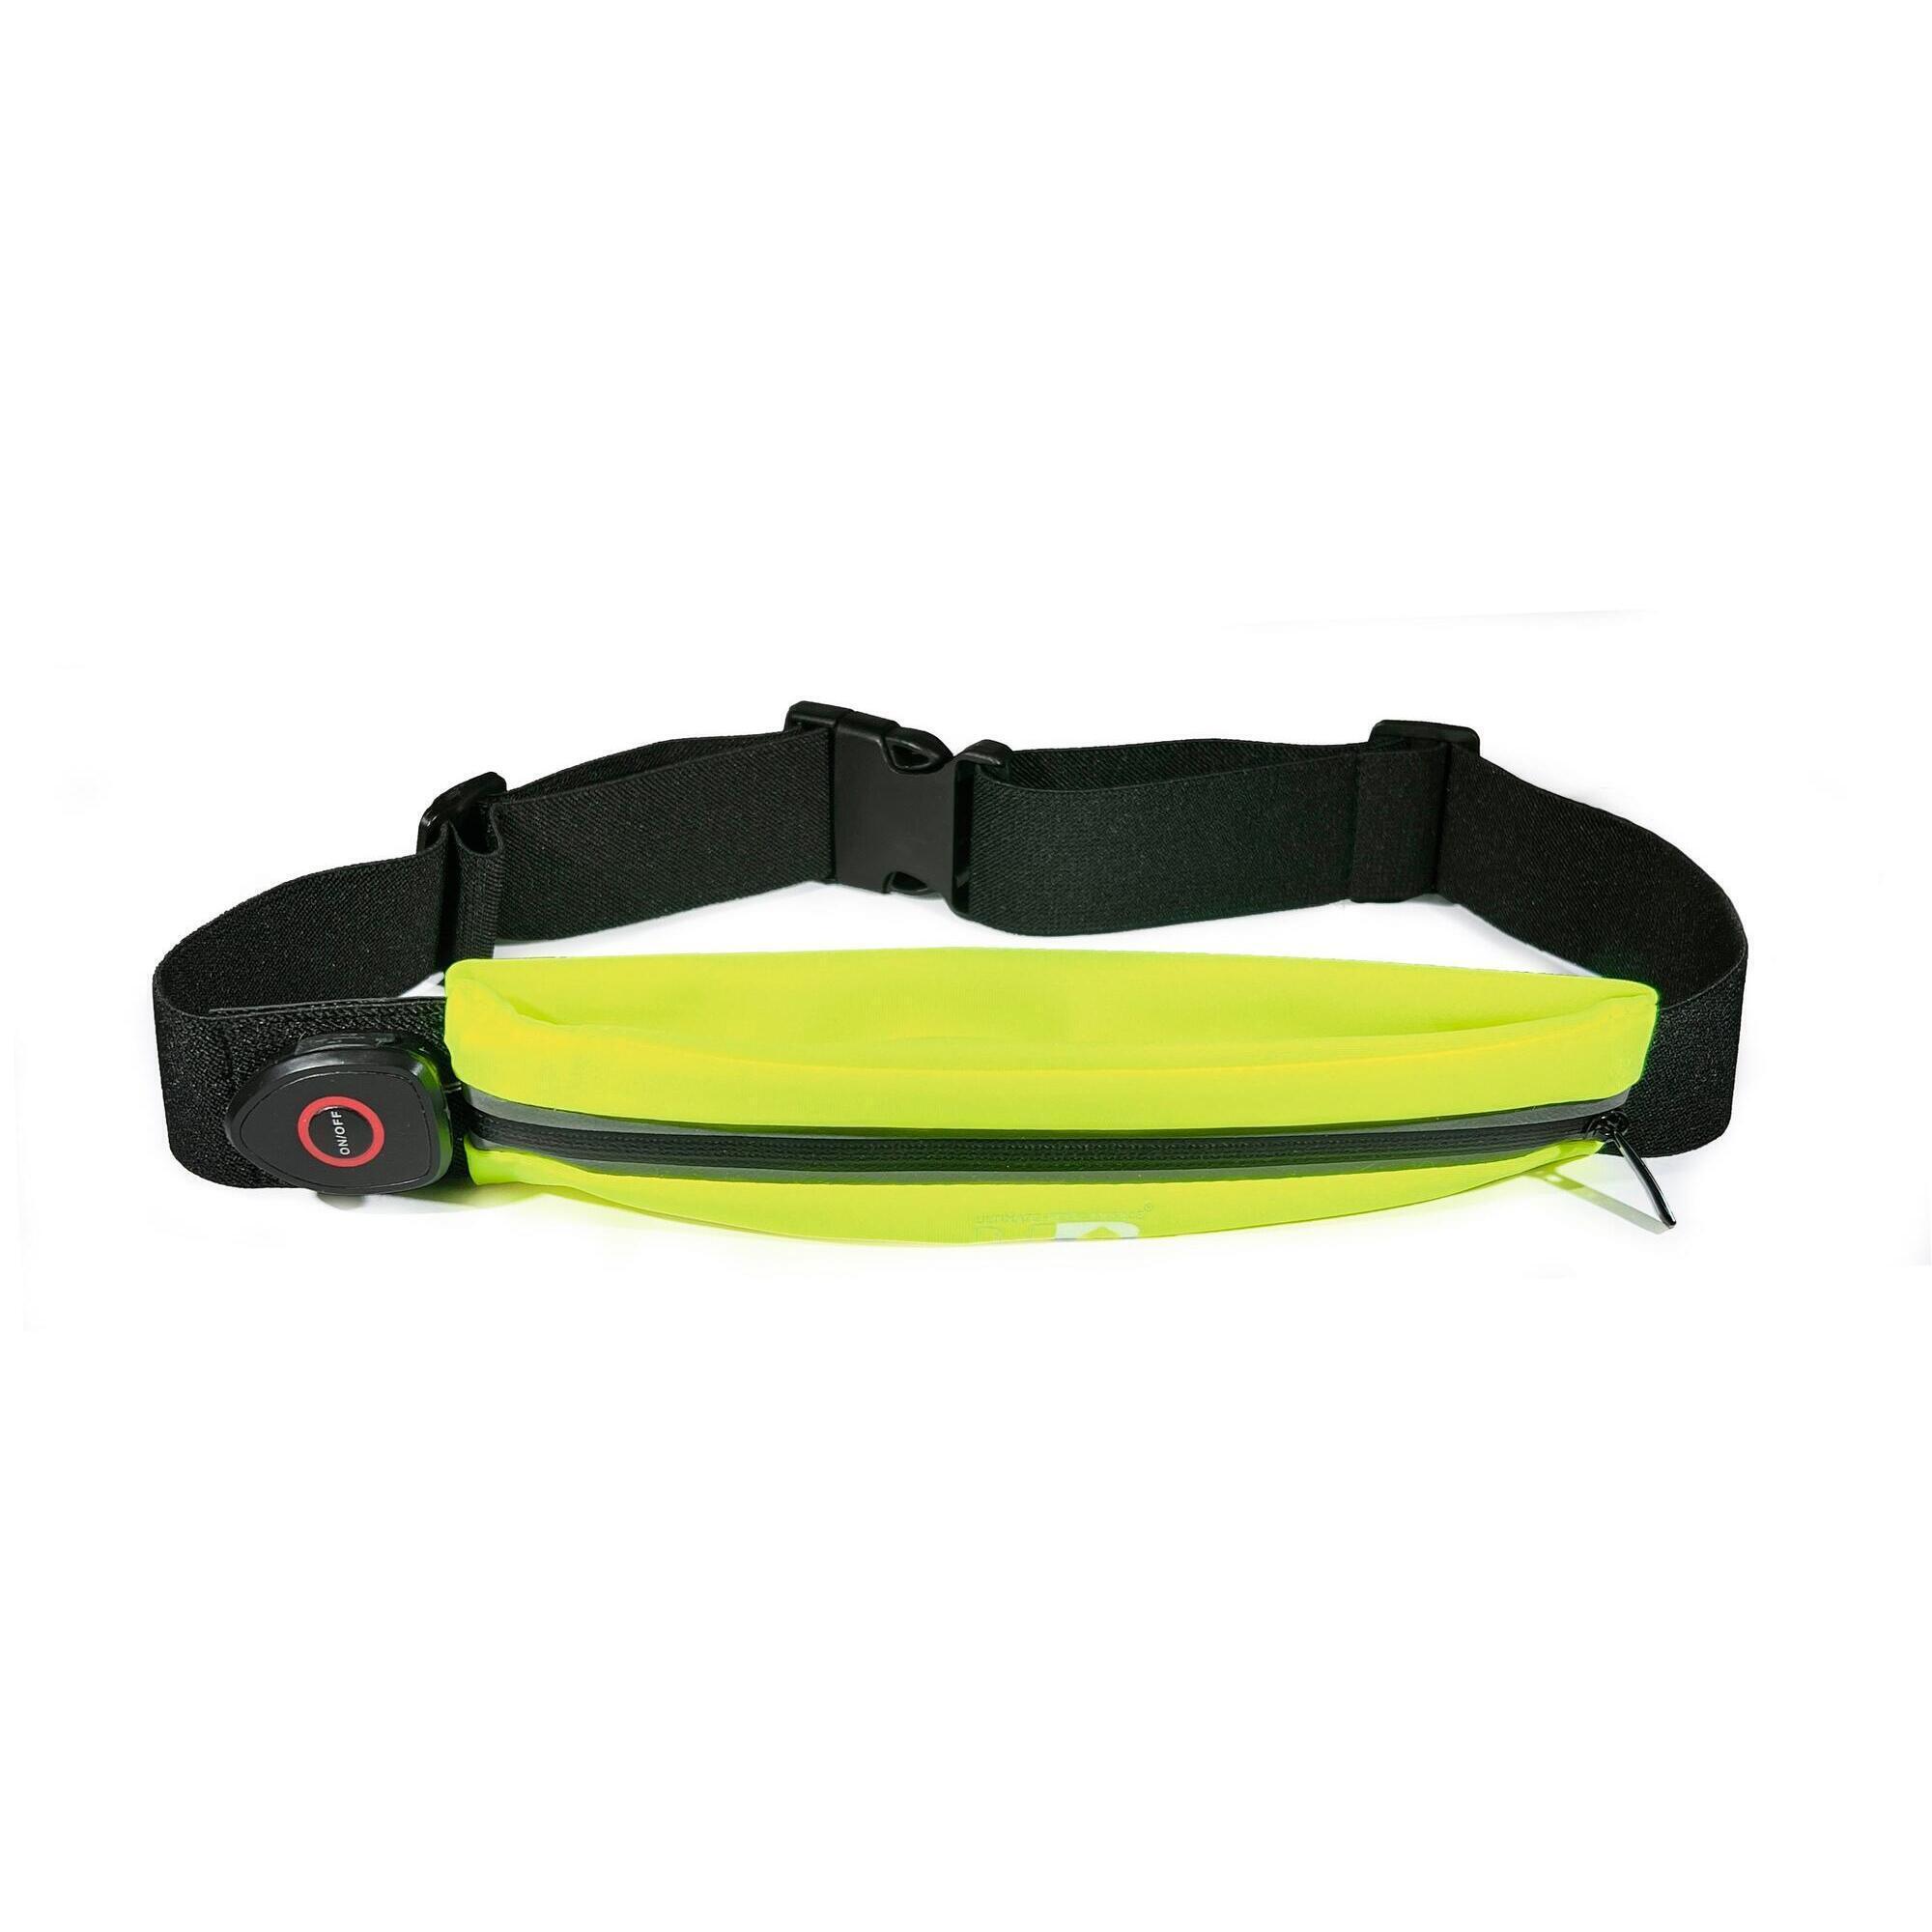 Ultimate Performance Ease LED Expandable Waistbag with Light 1/5